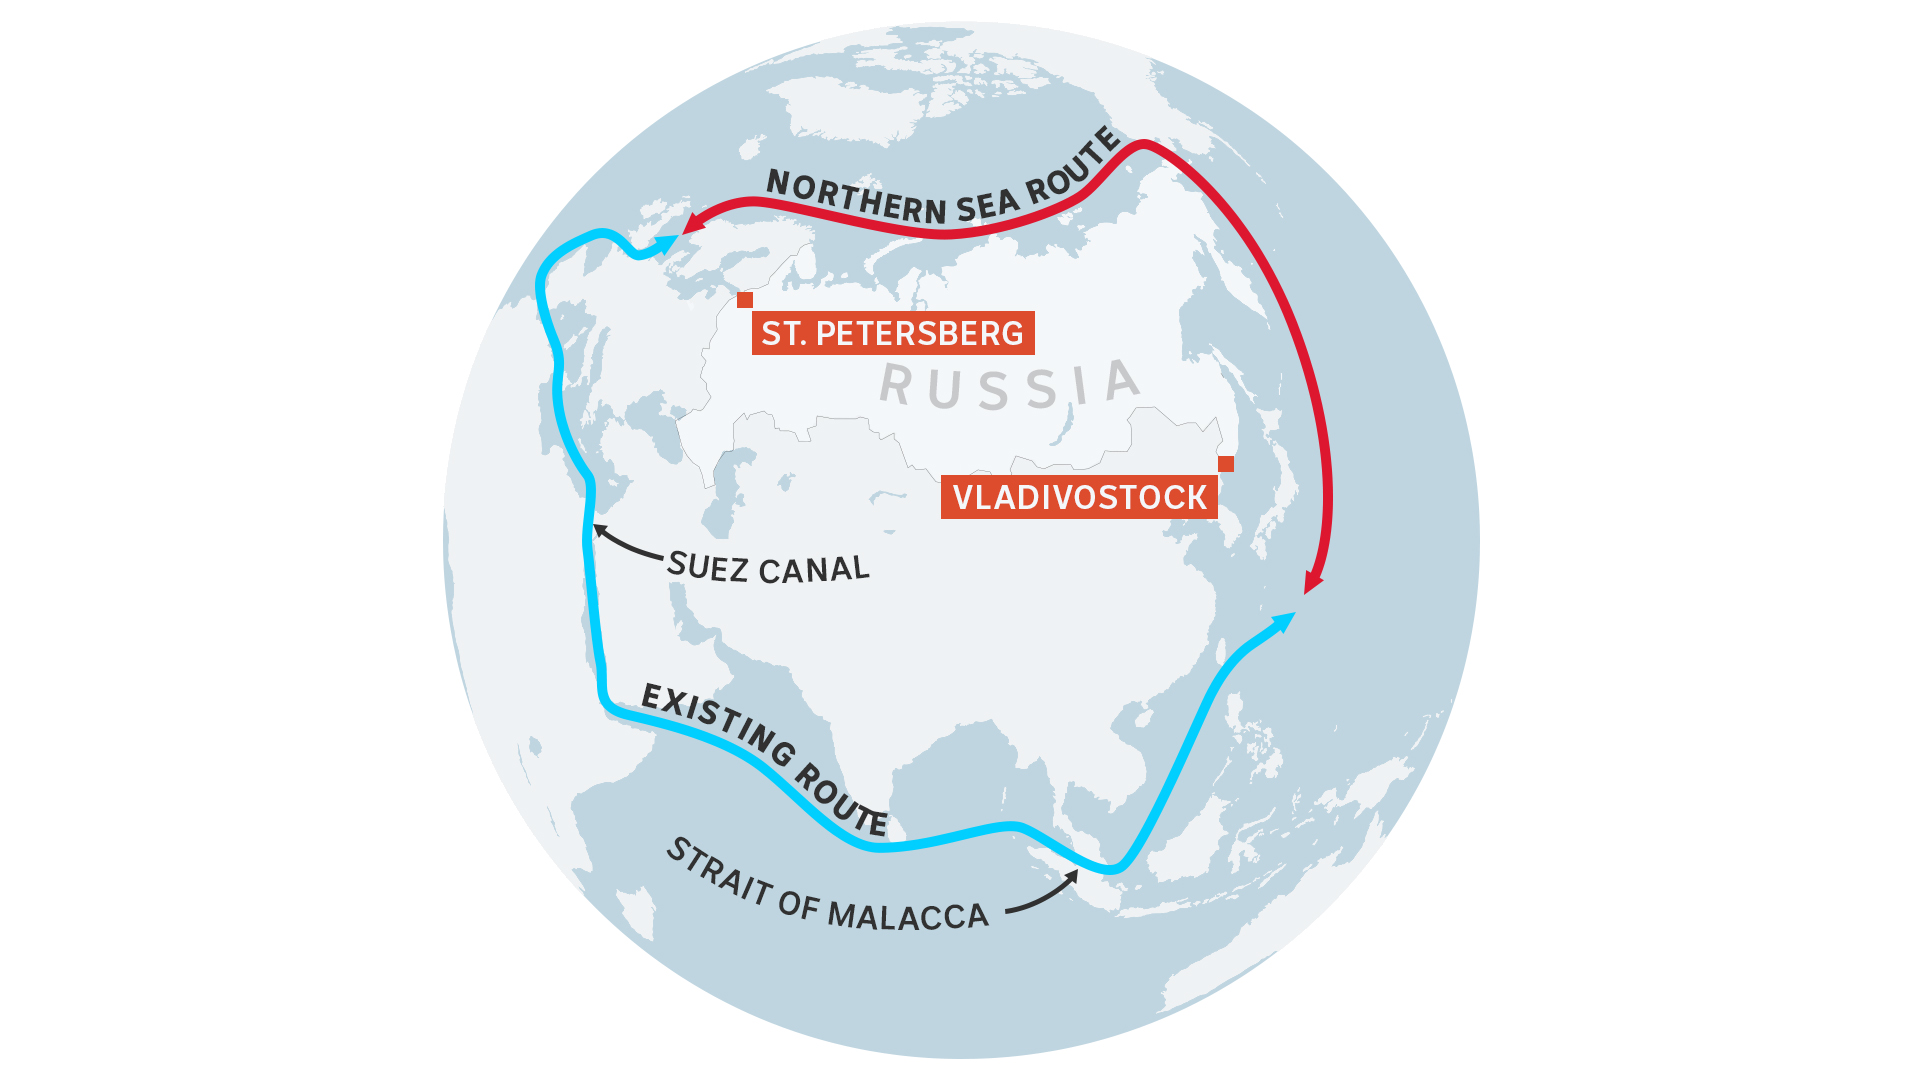 A map  showing Russia's Northern Sea Route and the existing primary trade route through the Suez Canal. 